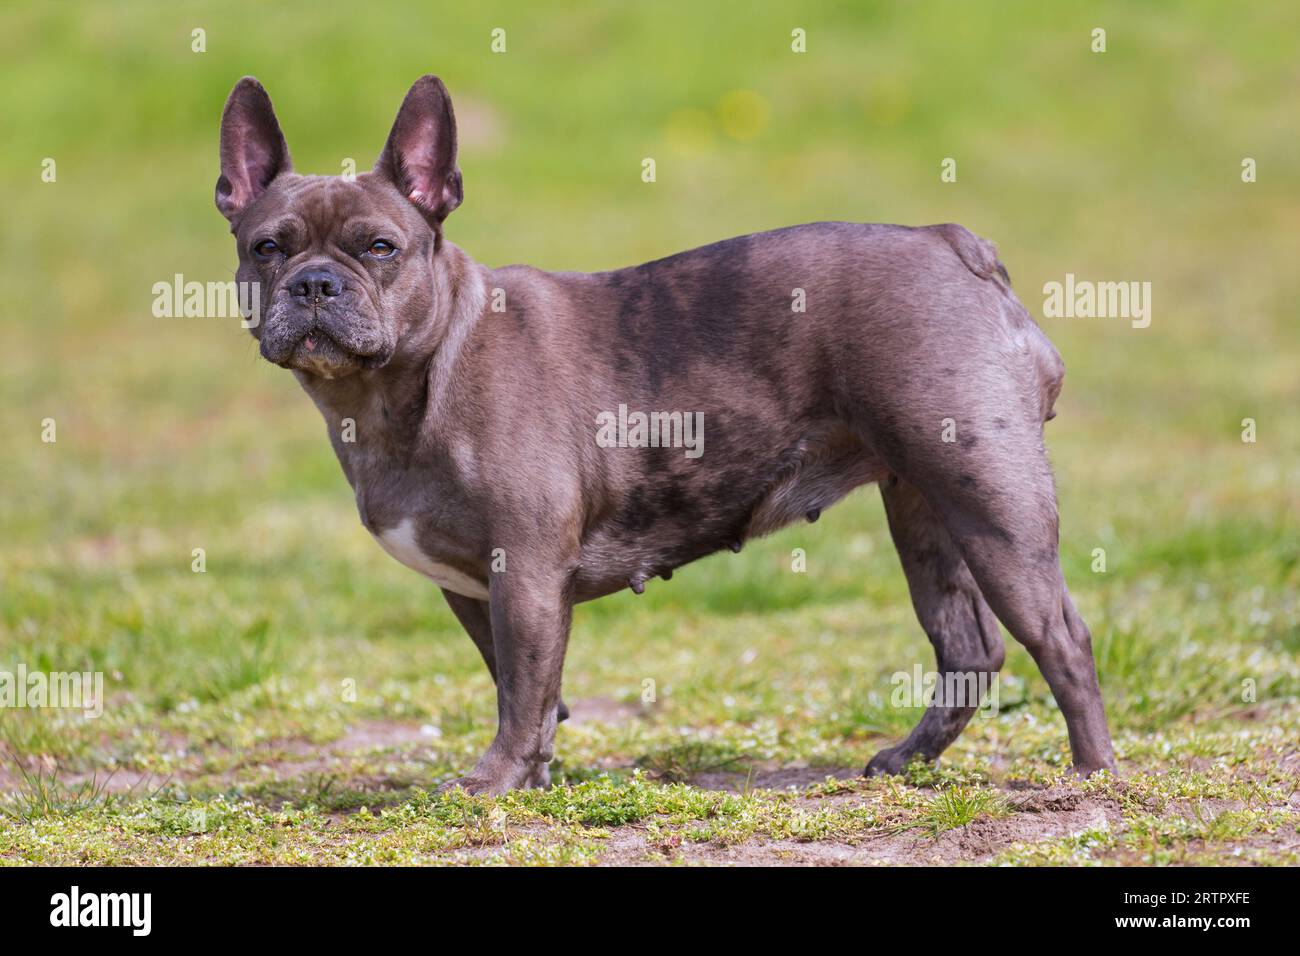 Female Lilac French bulldog / Isabella frenchie / Bouledogue Français, breed of French companion dog or toy dog in garden Stock Photo